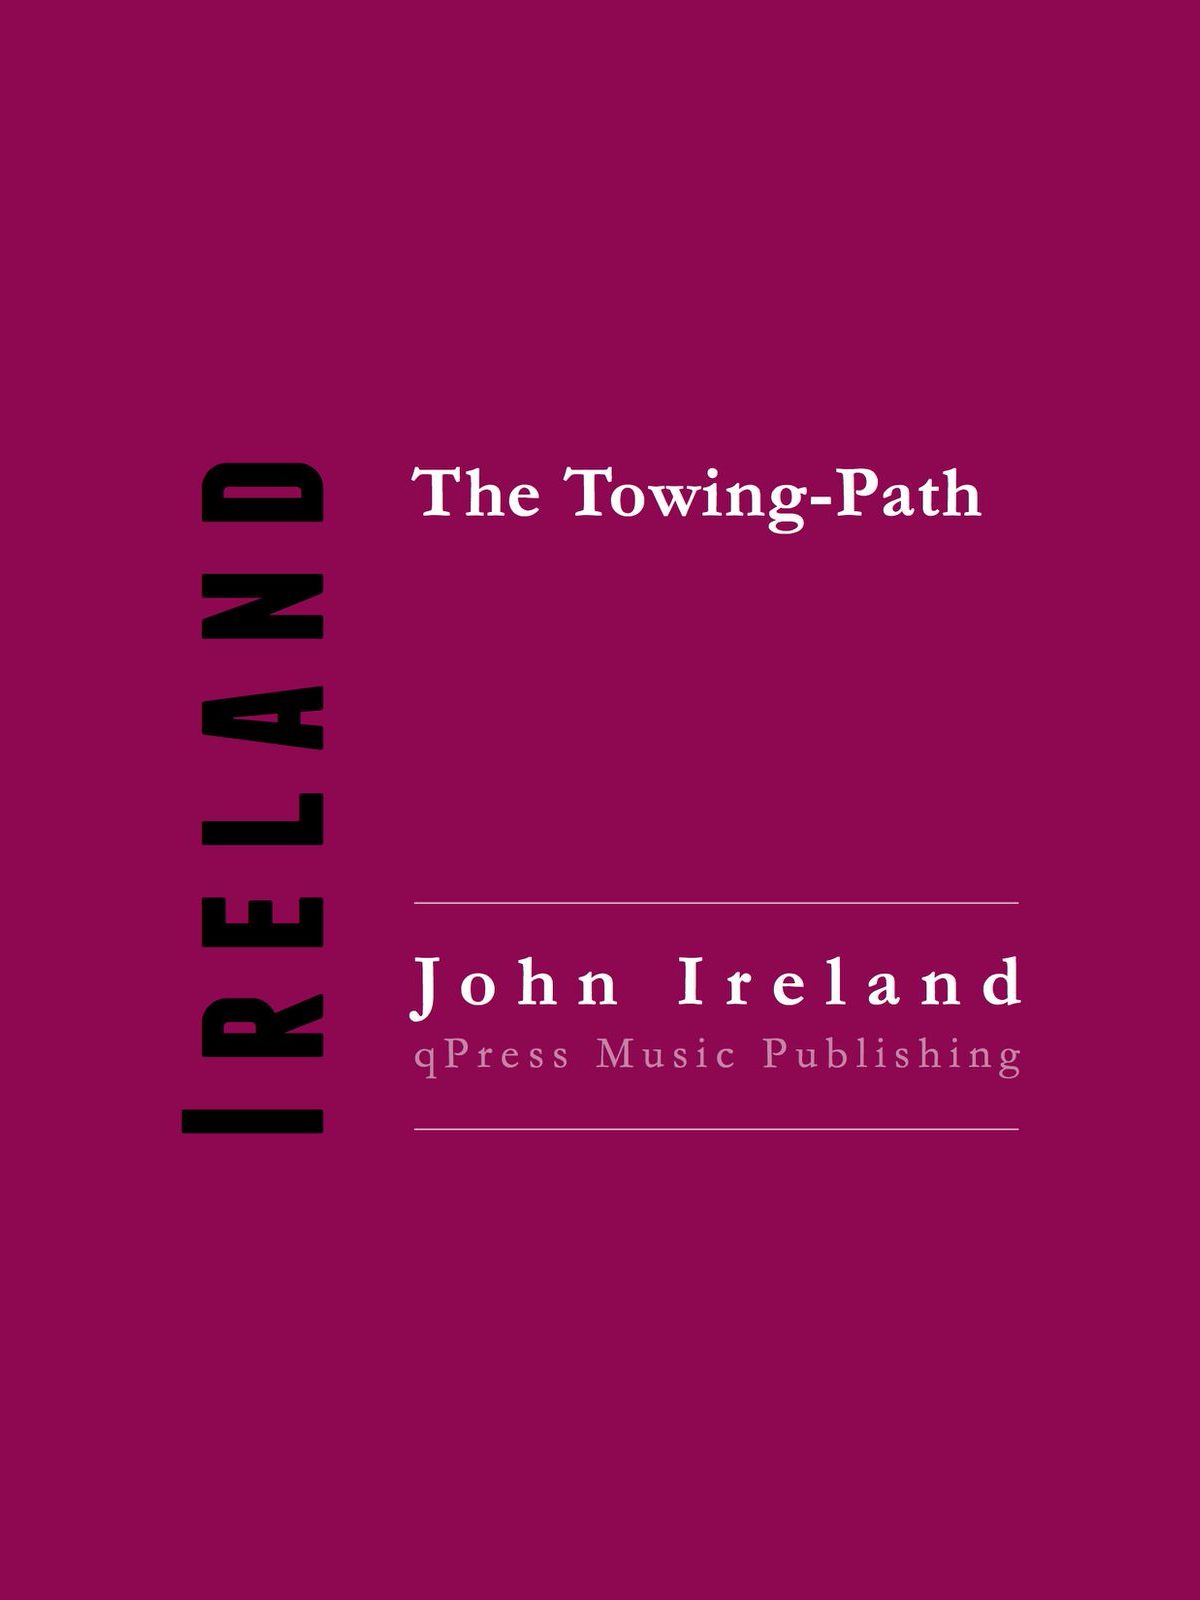 Ireland, The Towing-Path-p1